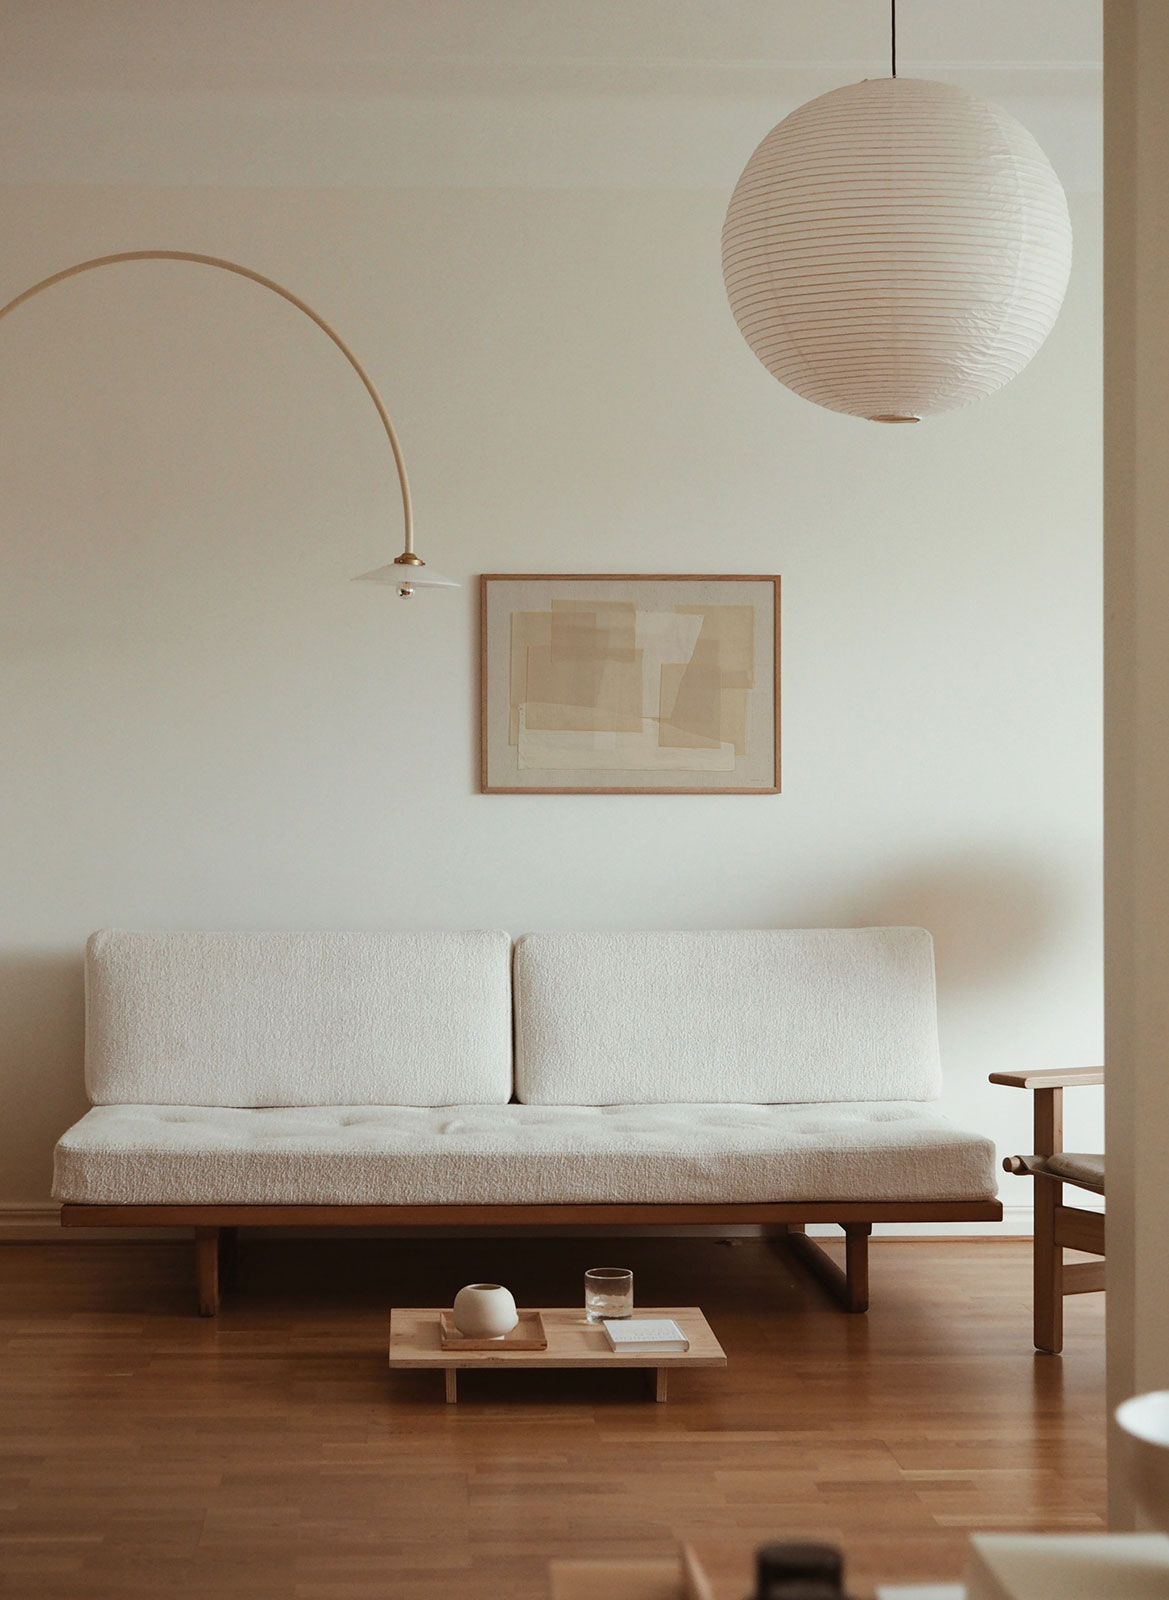 Framed minimalistic poster hanging above a couch by Atelier Cph